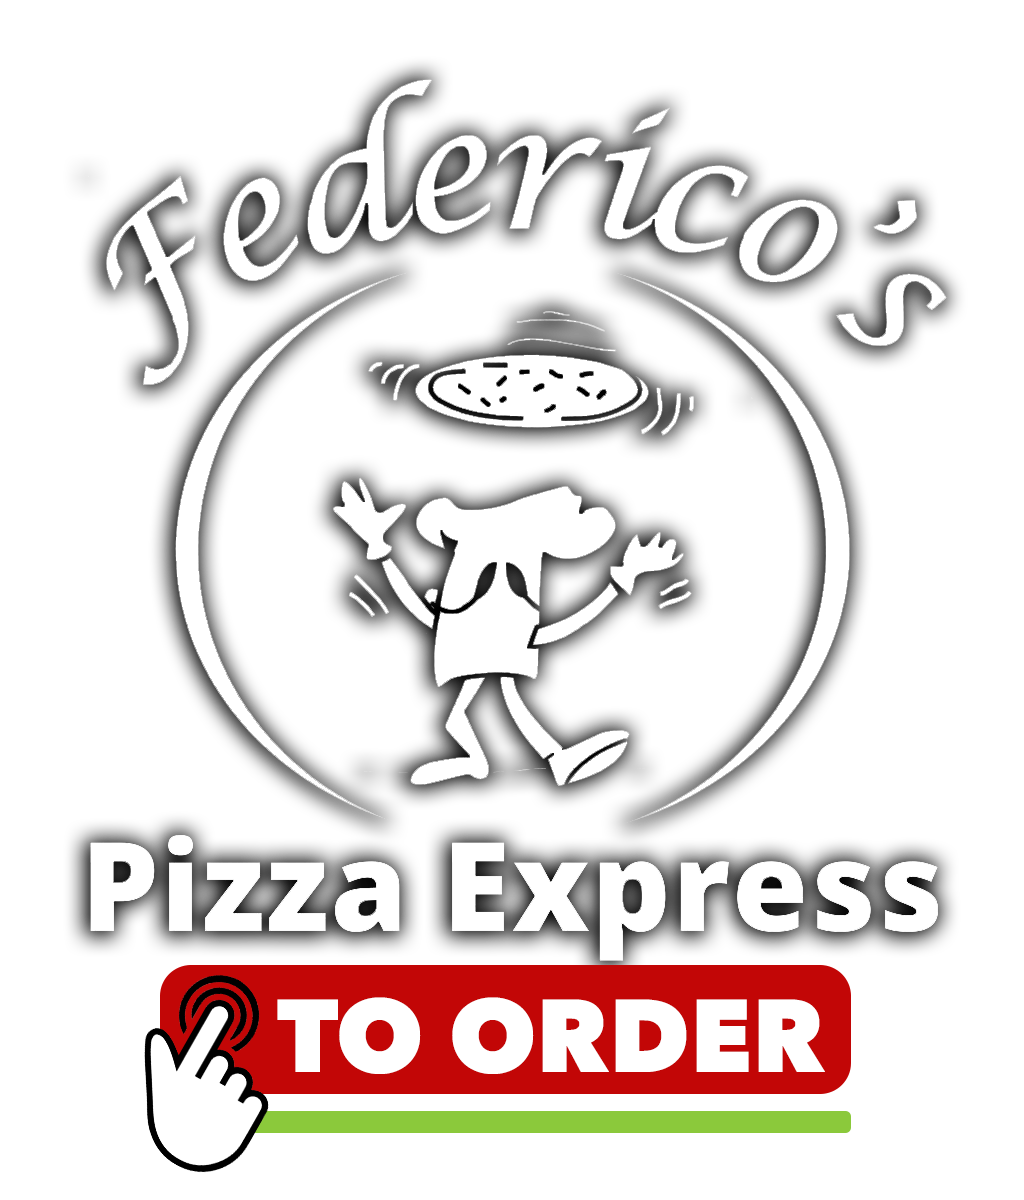 Federico's pizza express To Order logo